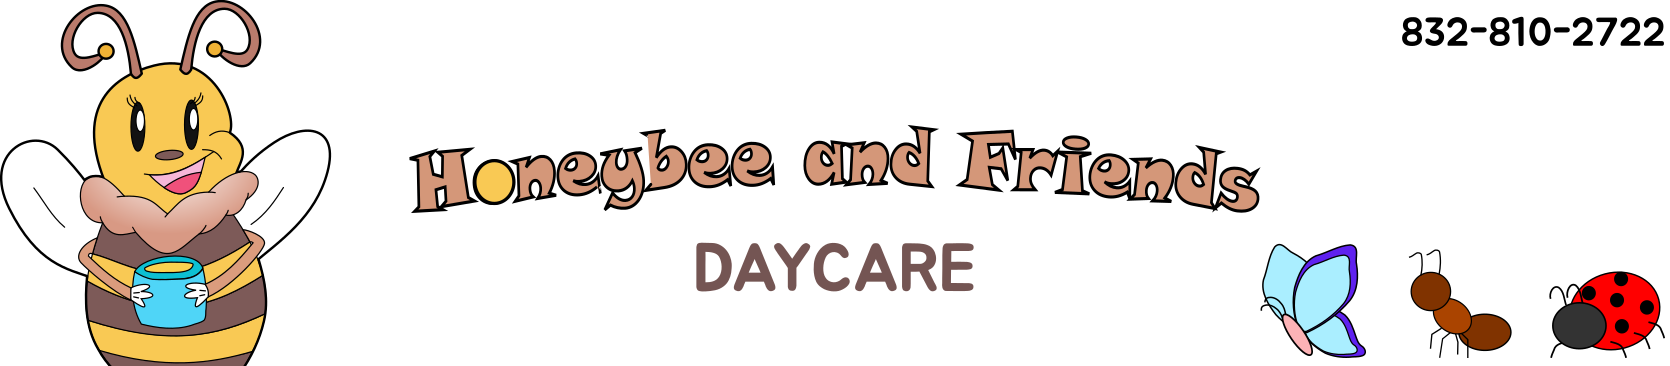  Honeybee and Friends Daycare. The Woodlands, TX, 77385